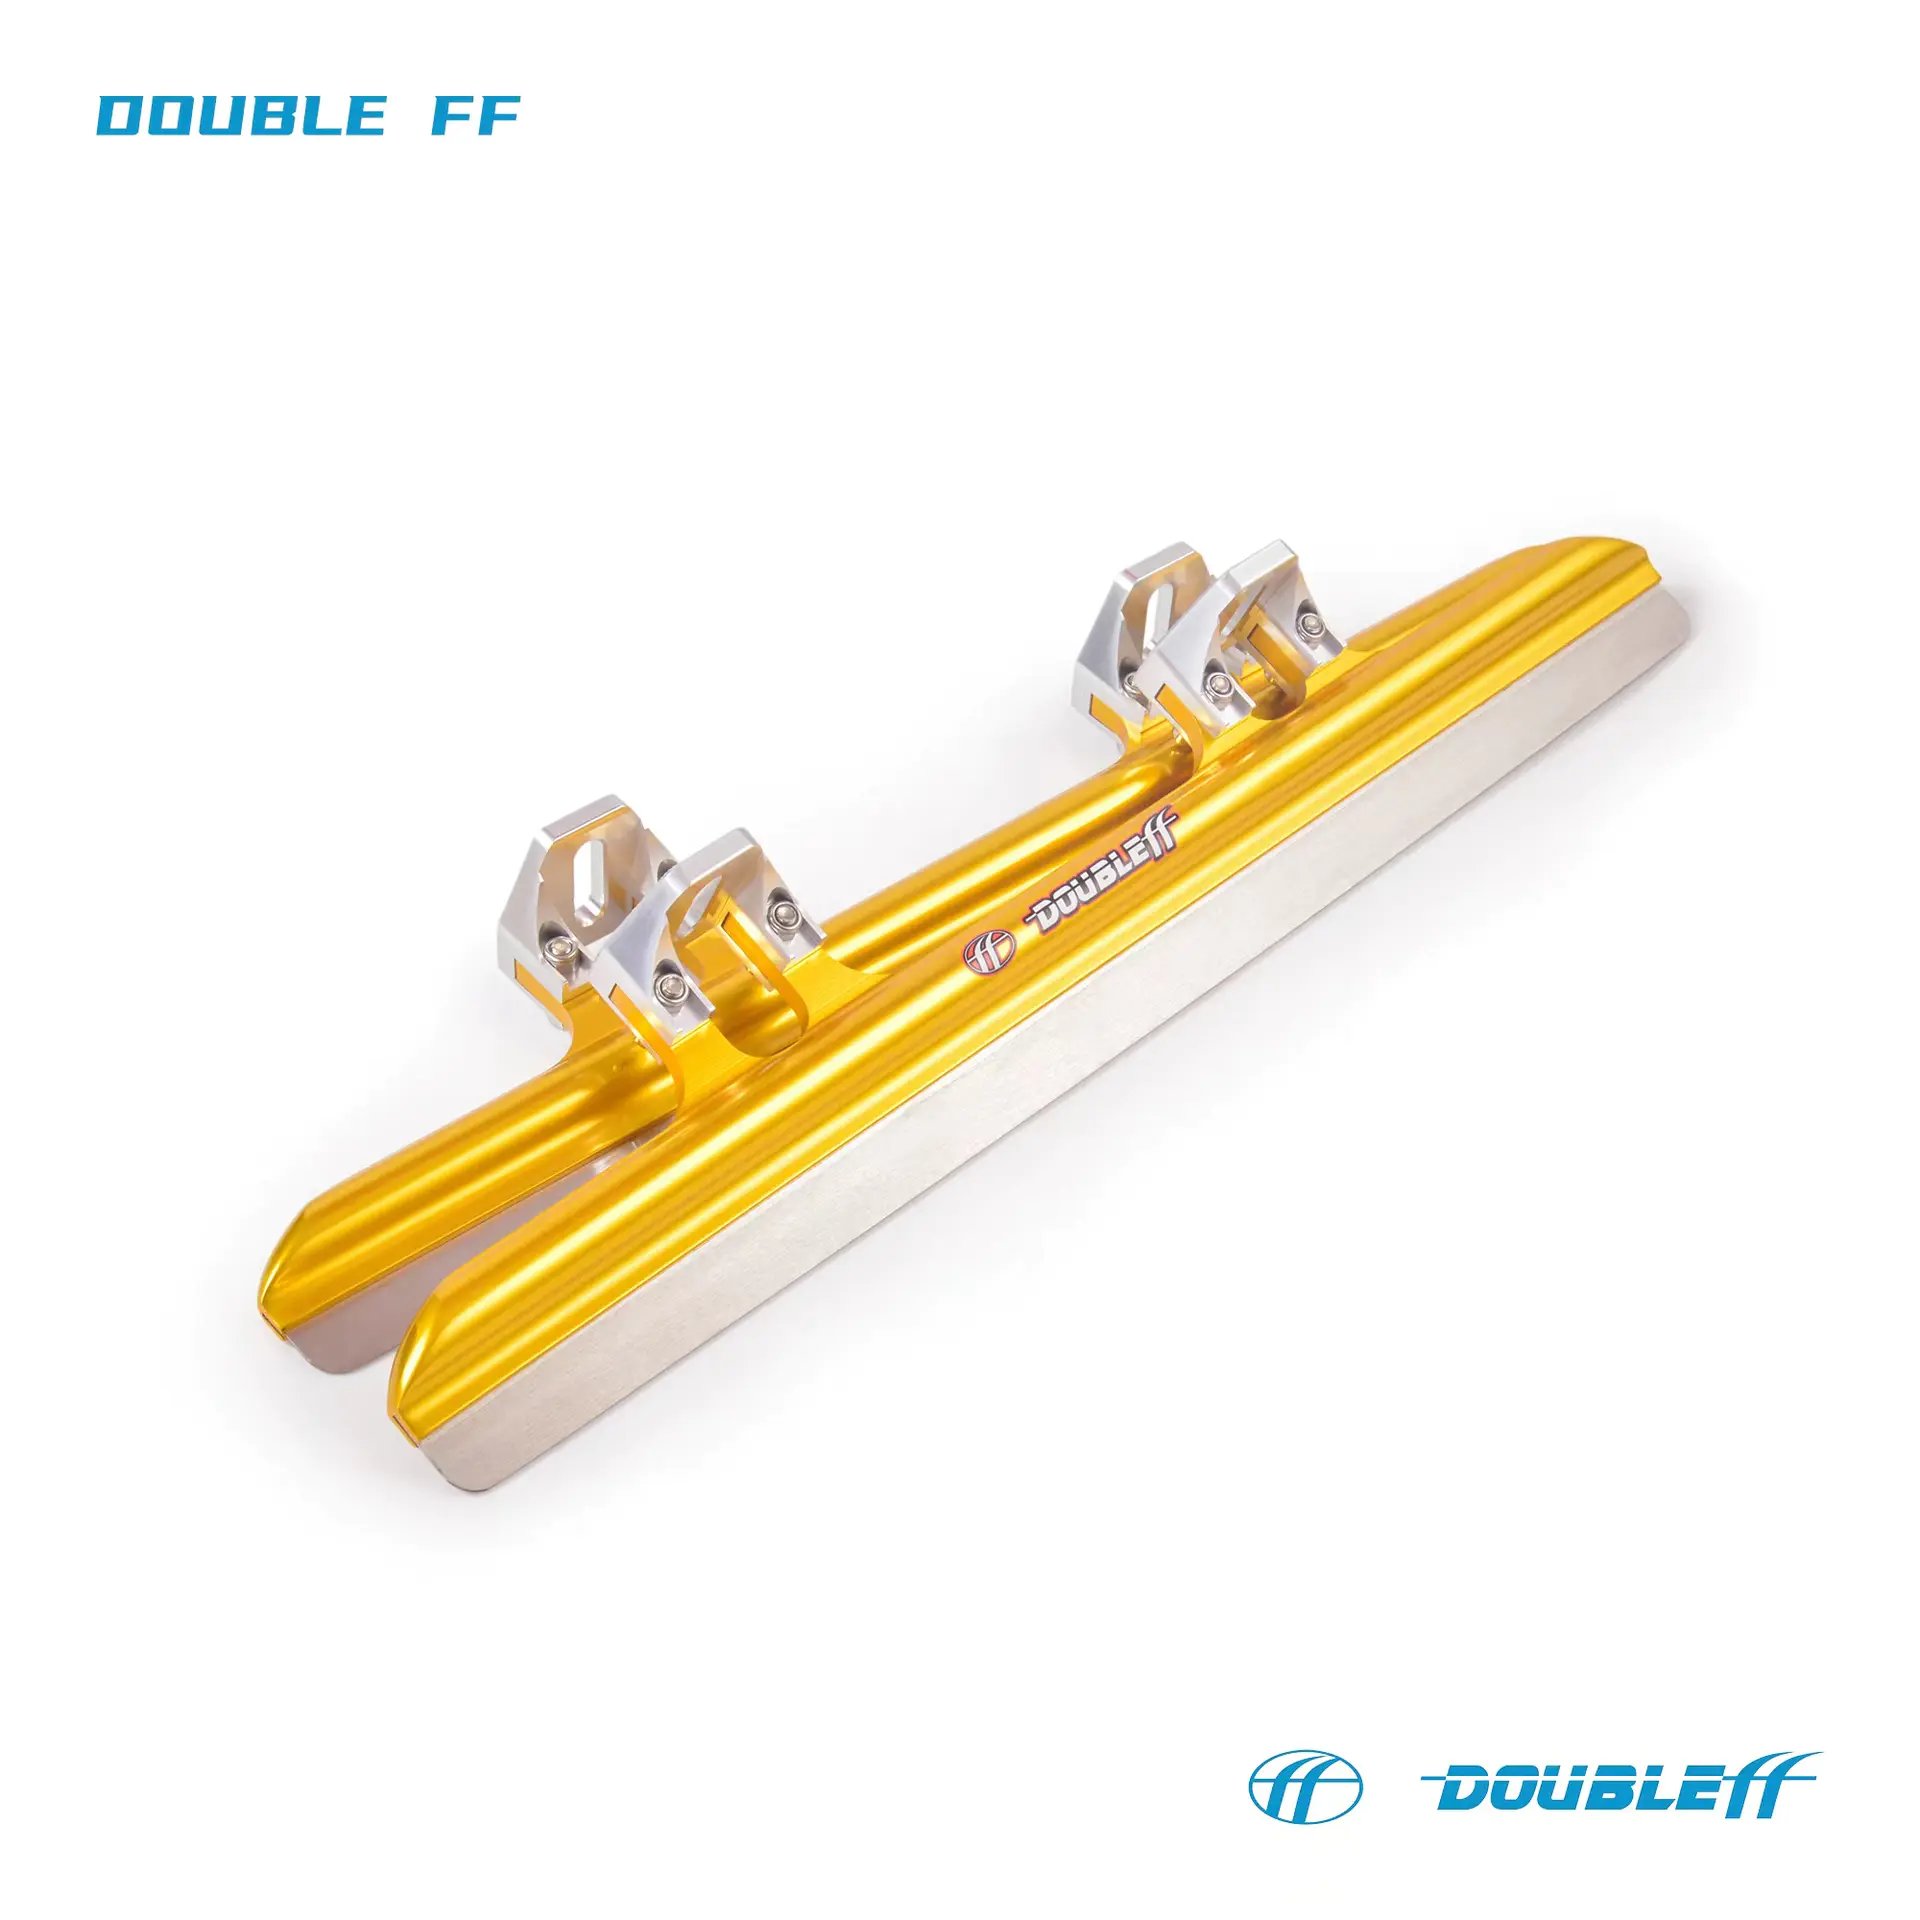 Double FF Professional Short Track Ice Skate Blades 64HRC CNC Aluminum 7005 Ice Skate Blades Professional Double Alloy Blade-Blue/Gold